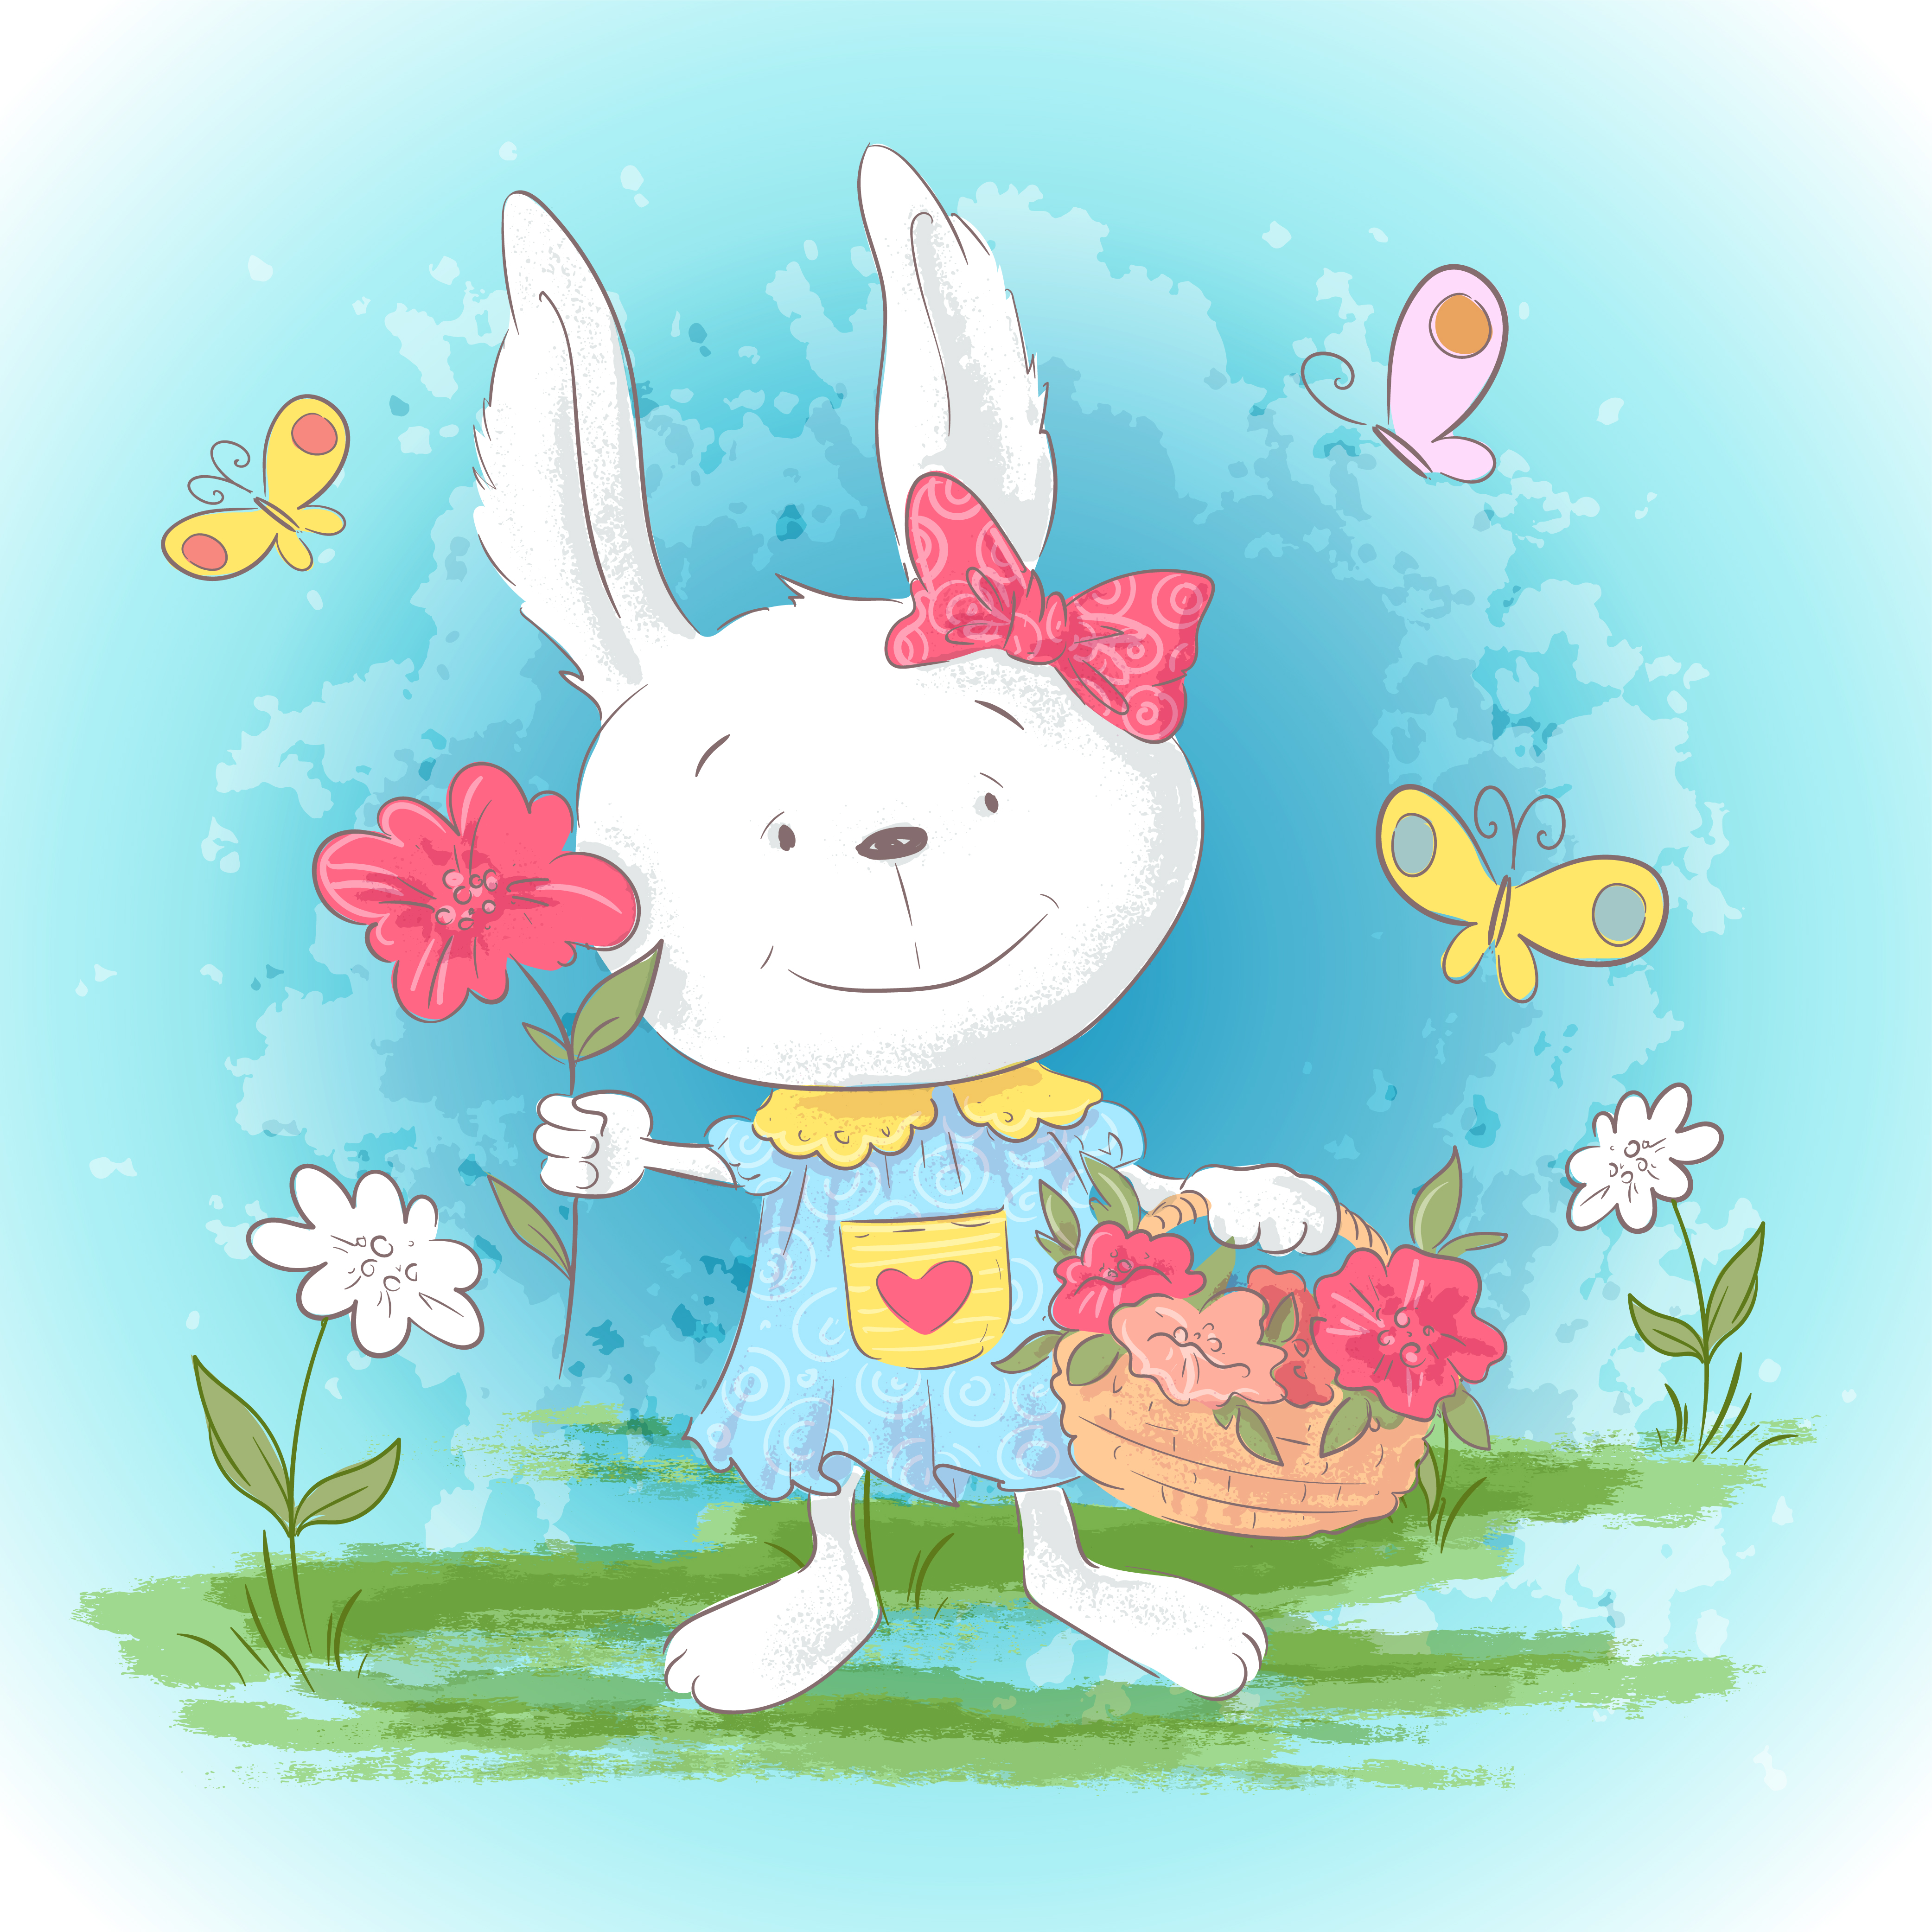 Illustration postcard cute cartoon bunny with flowers and butterflies